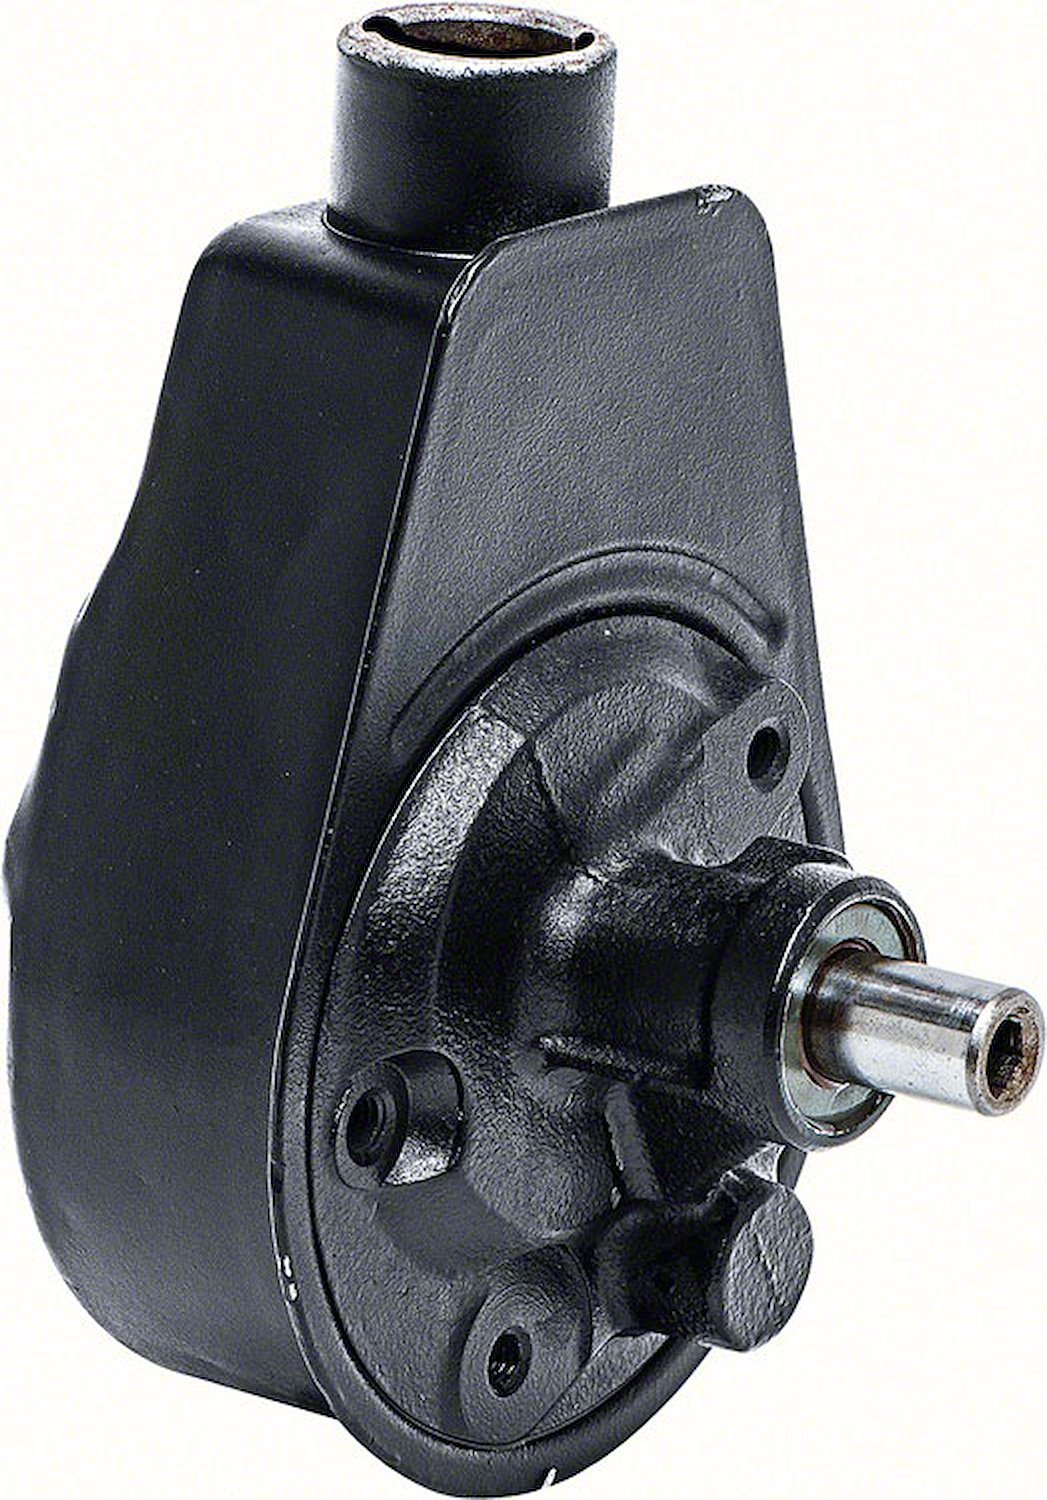 A7048 Power Steering Pump With "A-Style" Reservoir 1975-79 Small Block